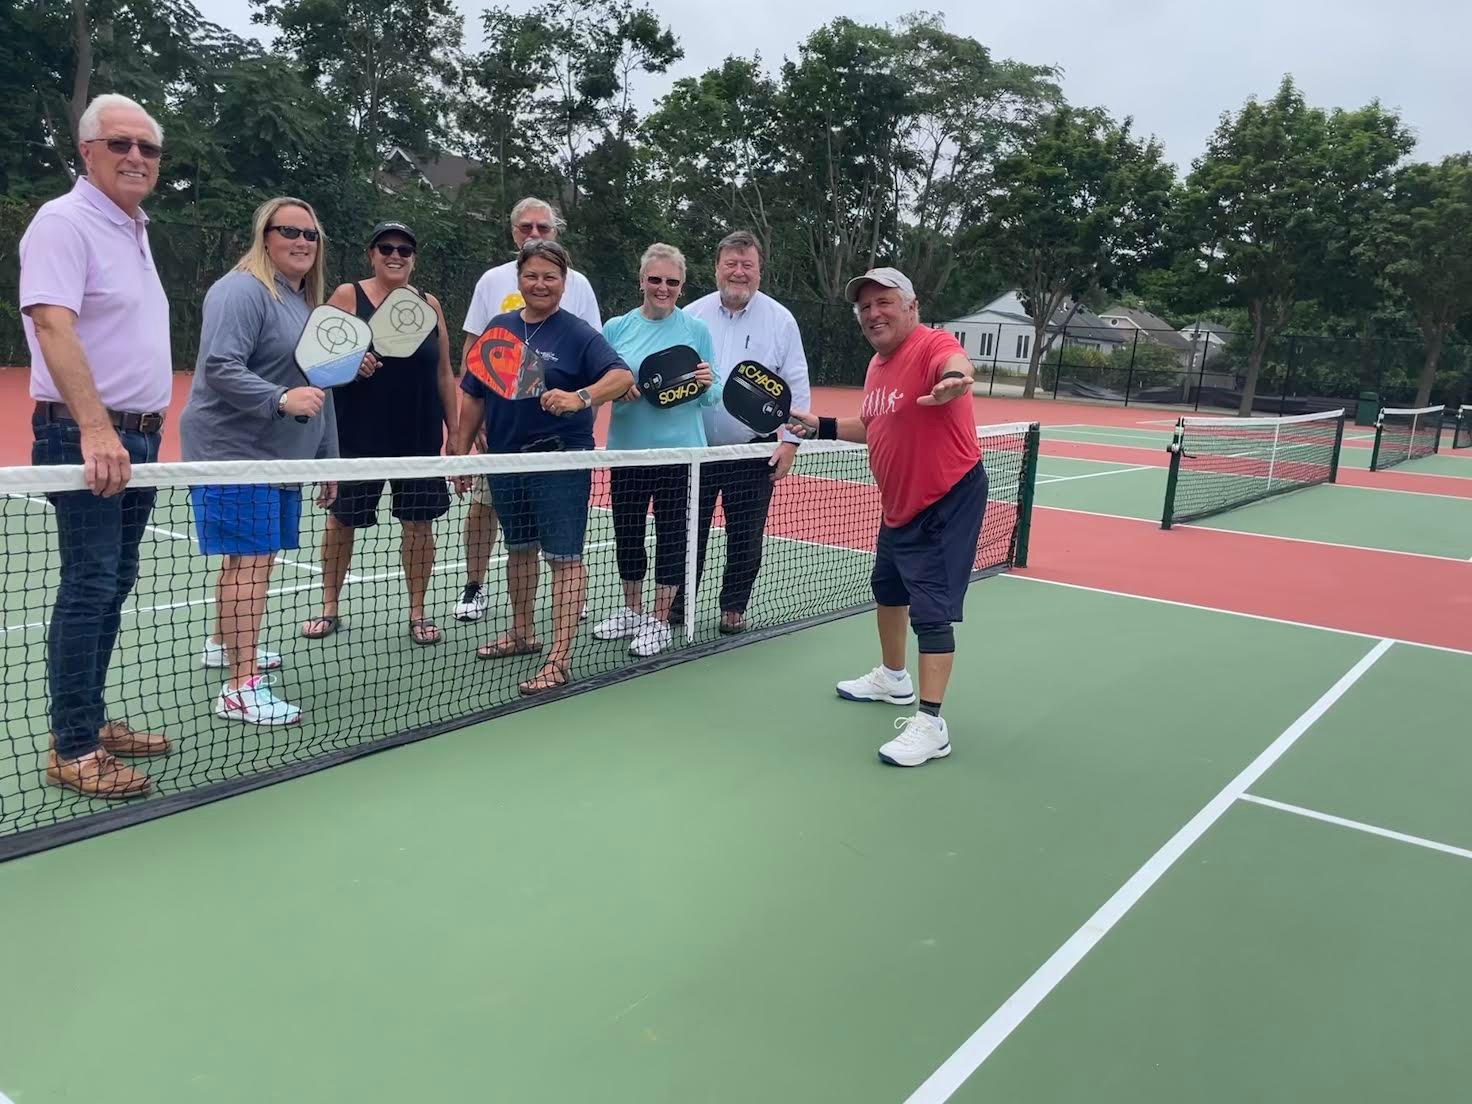 New pickleball courts are now open! The Long Island Advance